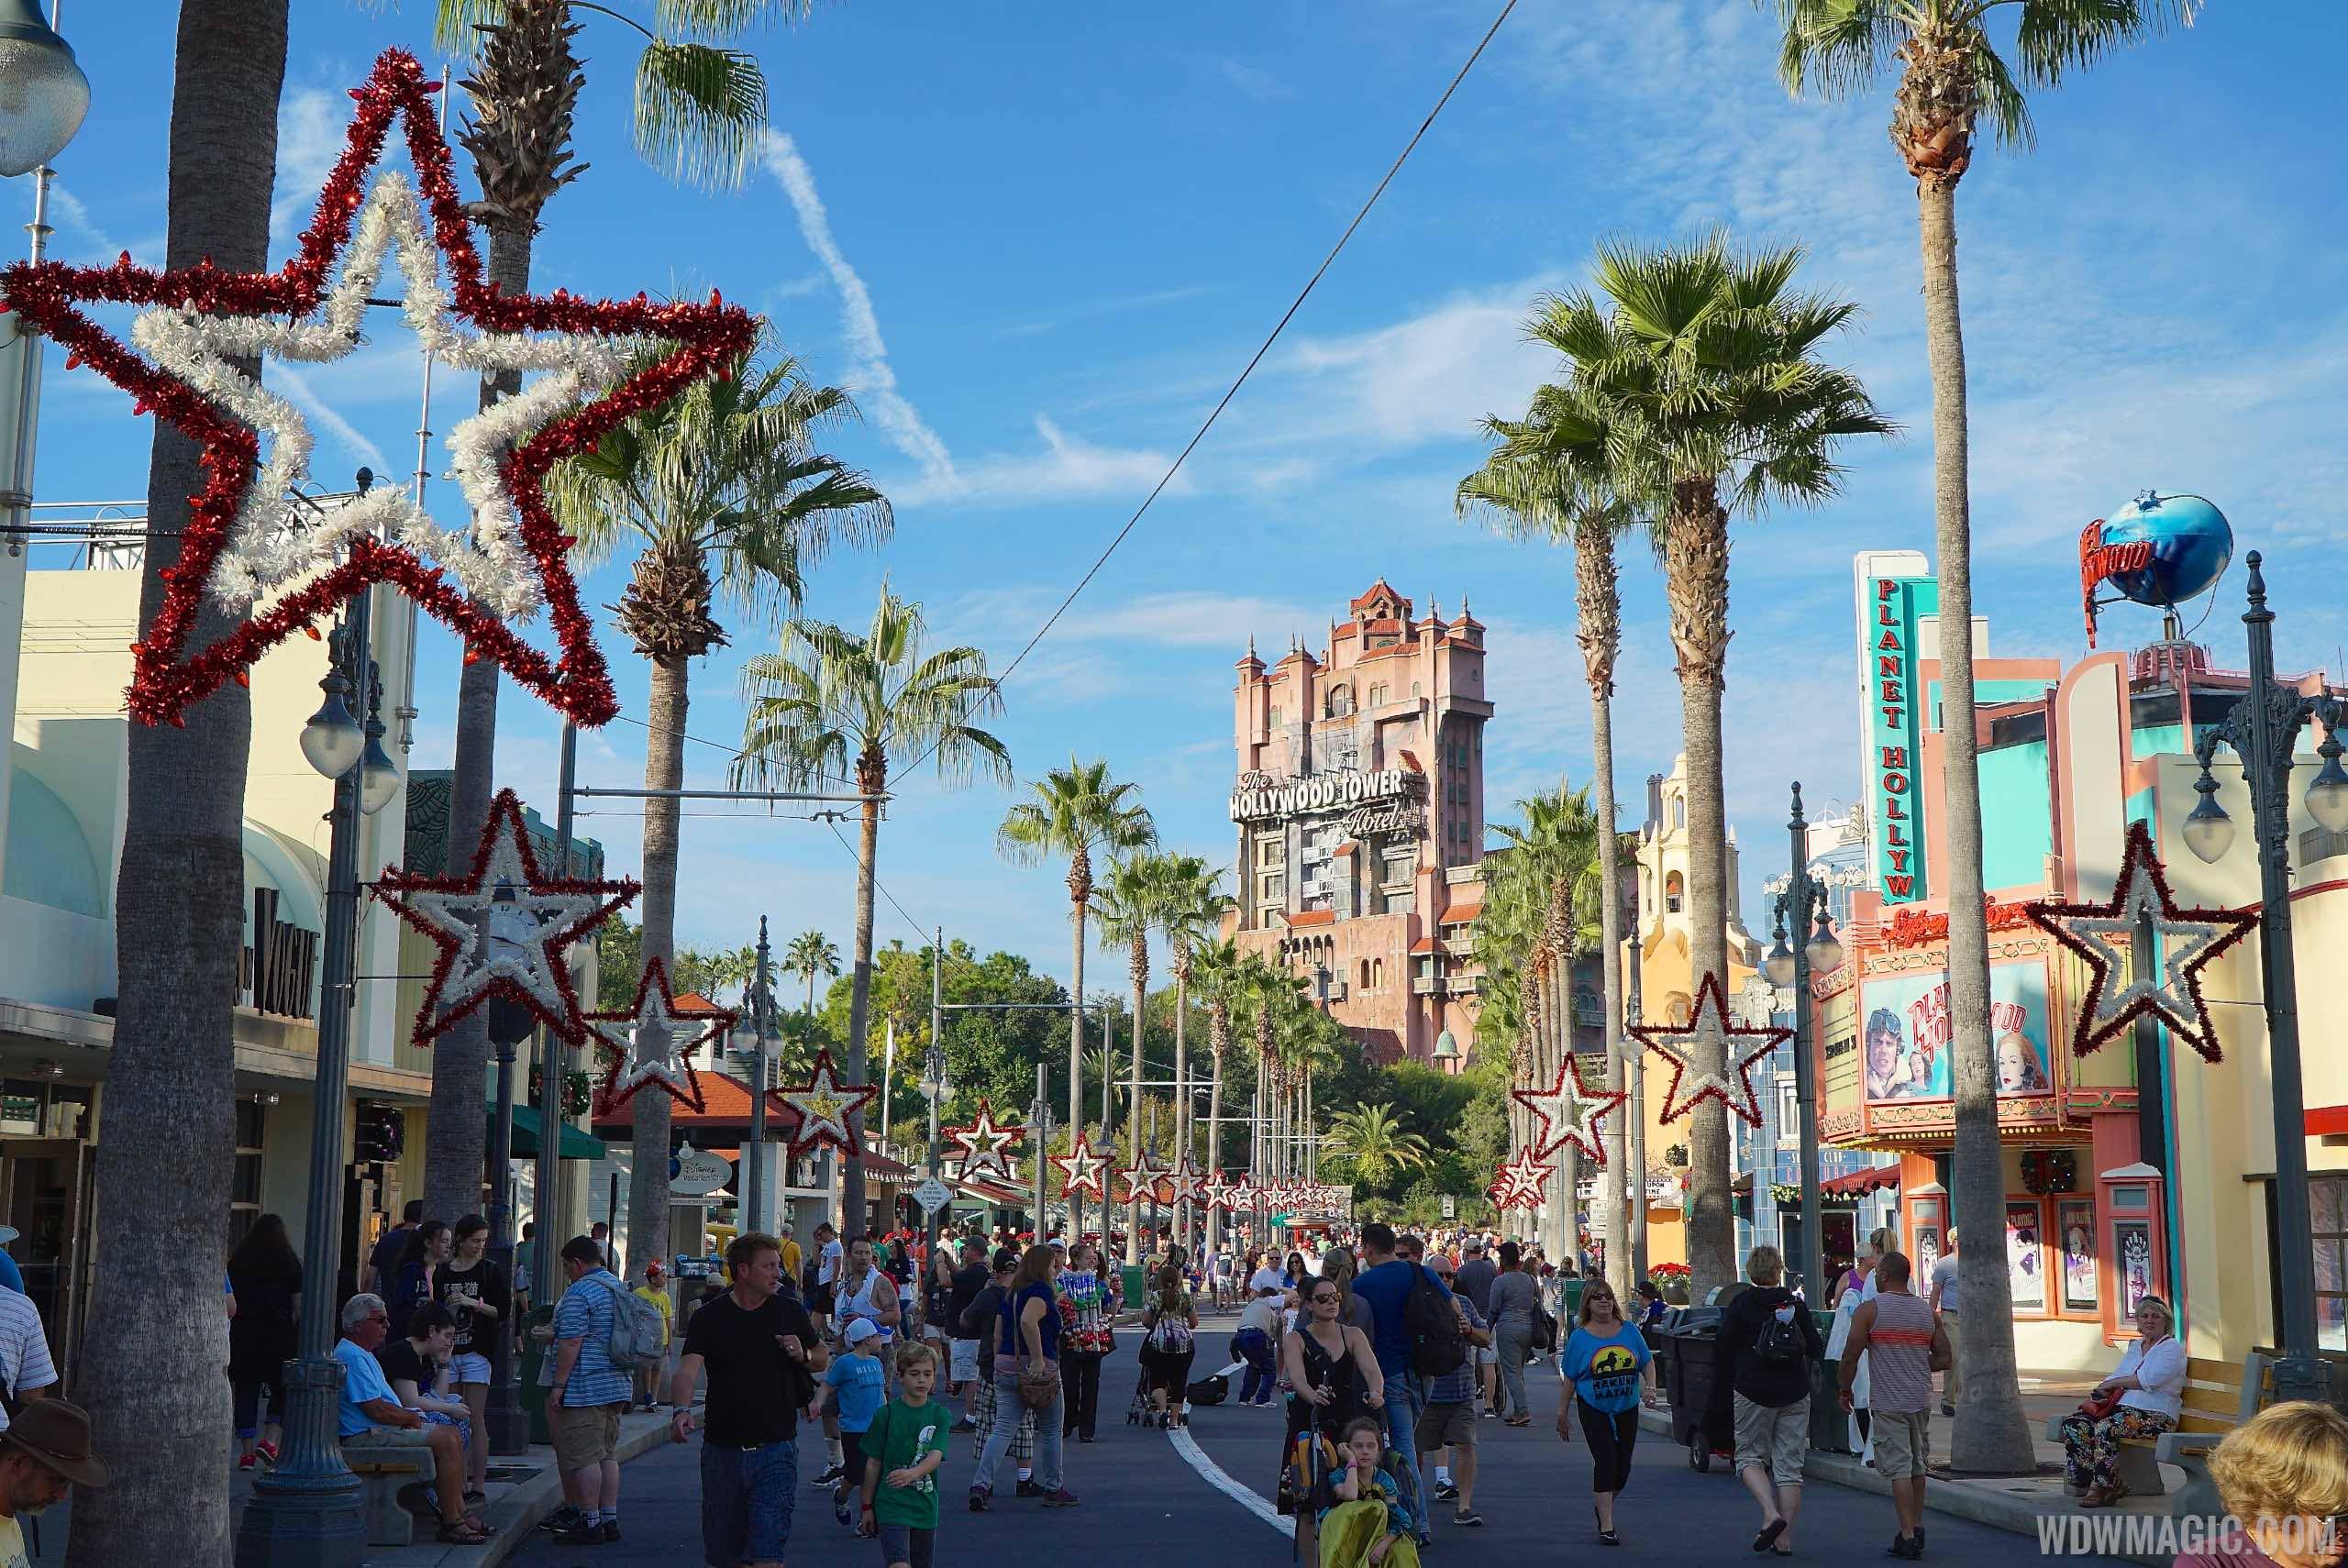 PHOTOS - Holiday decorations now up at Disney's Hollywood Studios